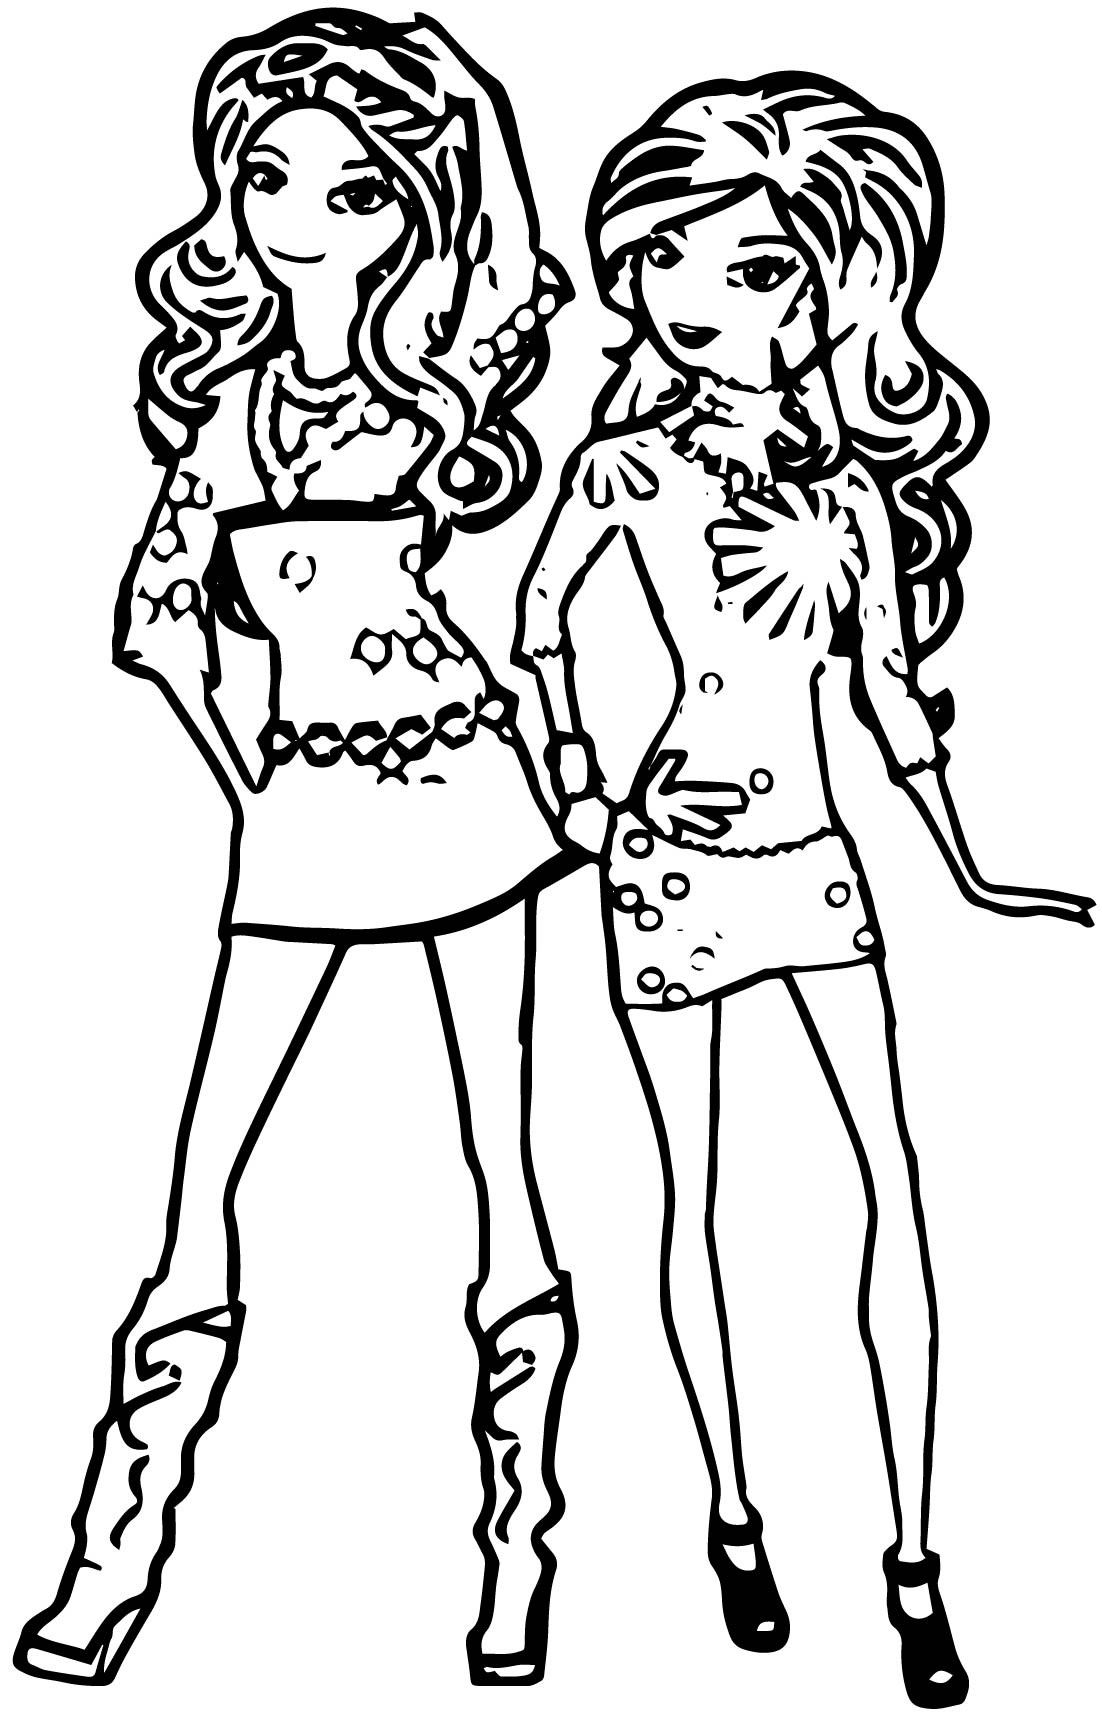 Best Friend Coloring Pages For Girls
 Coloring Pages For Girls